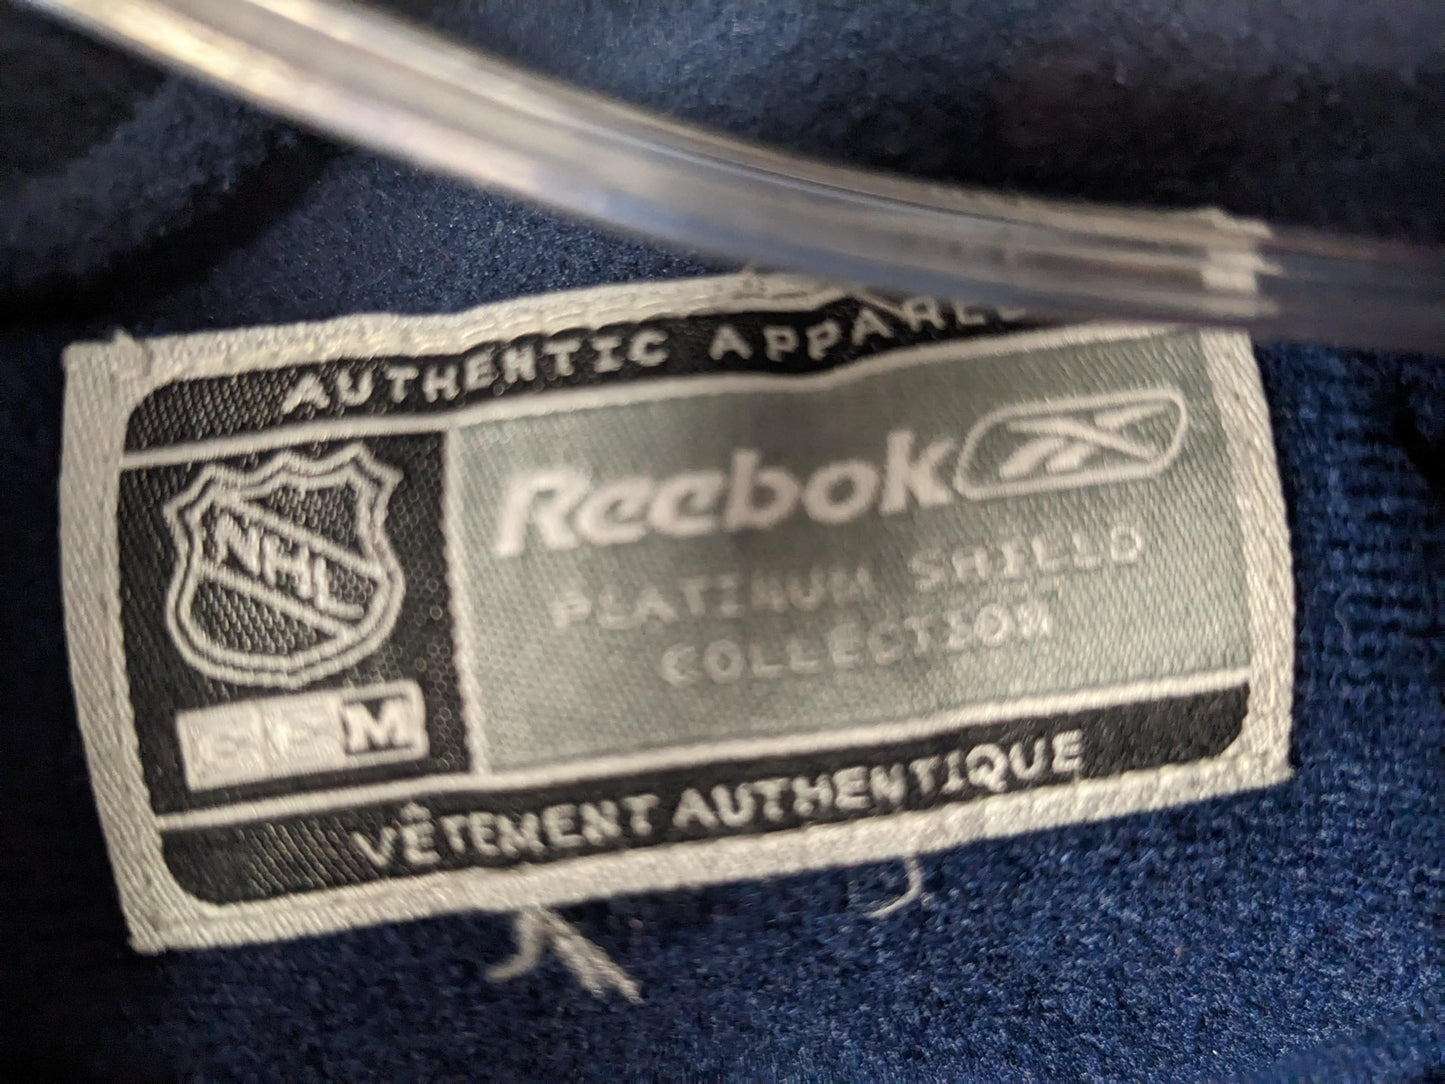 Reebok Avalanche NHL Half Zip Youth Jacket Coat Size Youth Medium Color Blue Condition Used